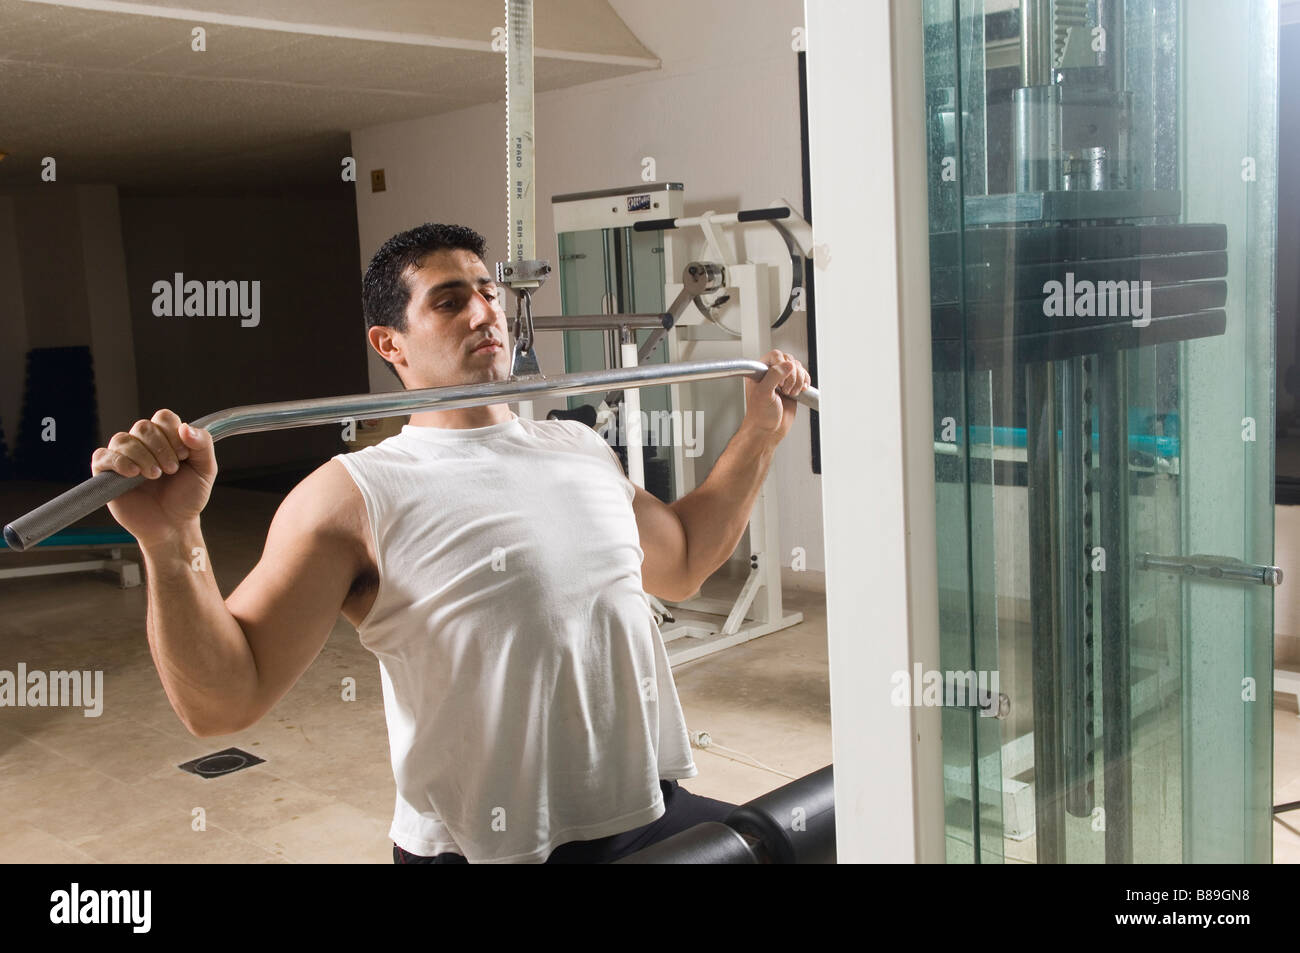 Man doing lat pulldown exercise in the gym Stock Photo